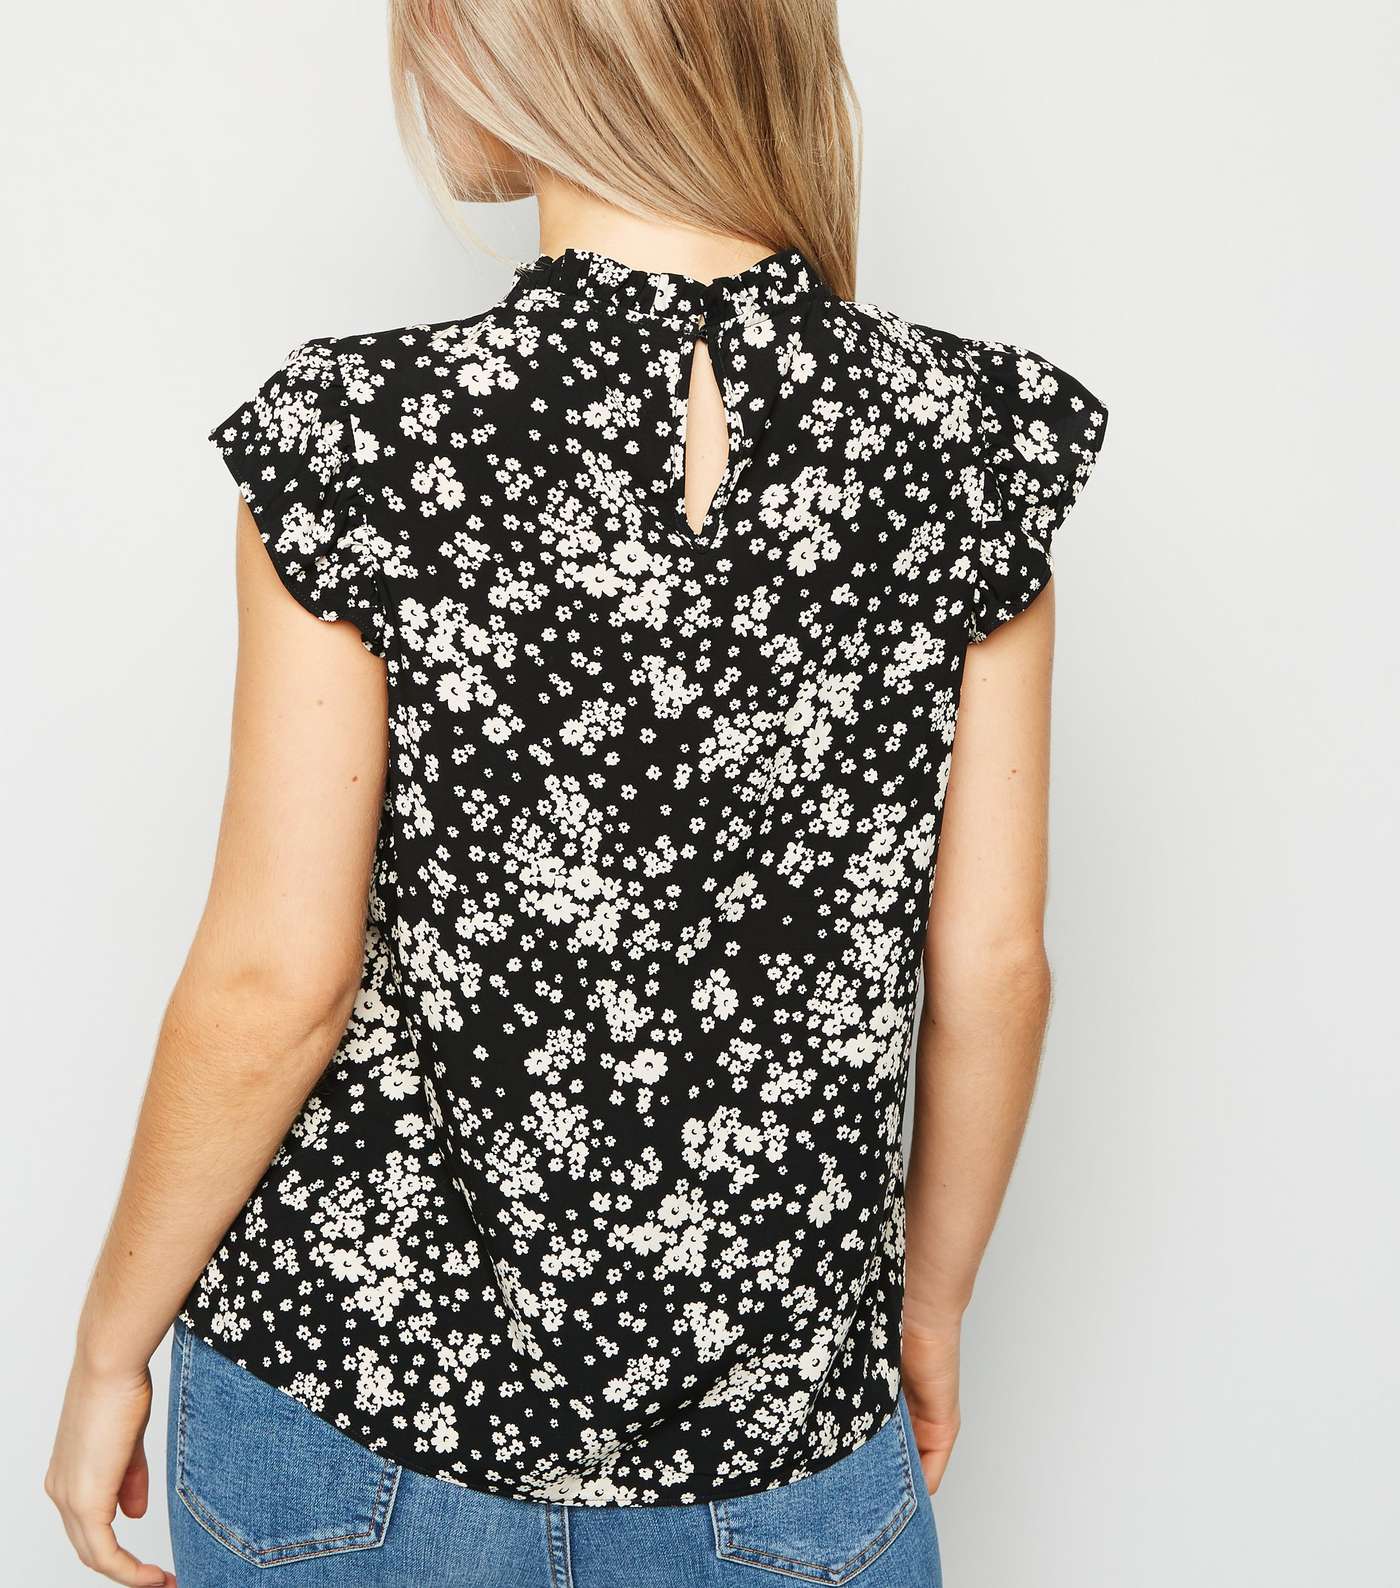 Petite Black Ditsy Floral High Neck Frill Top Image 3